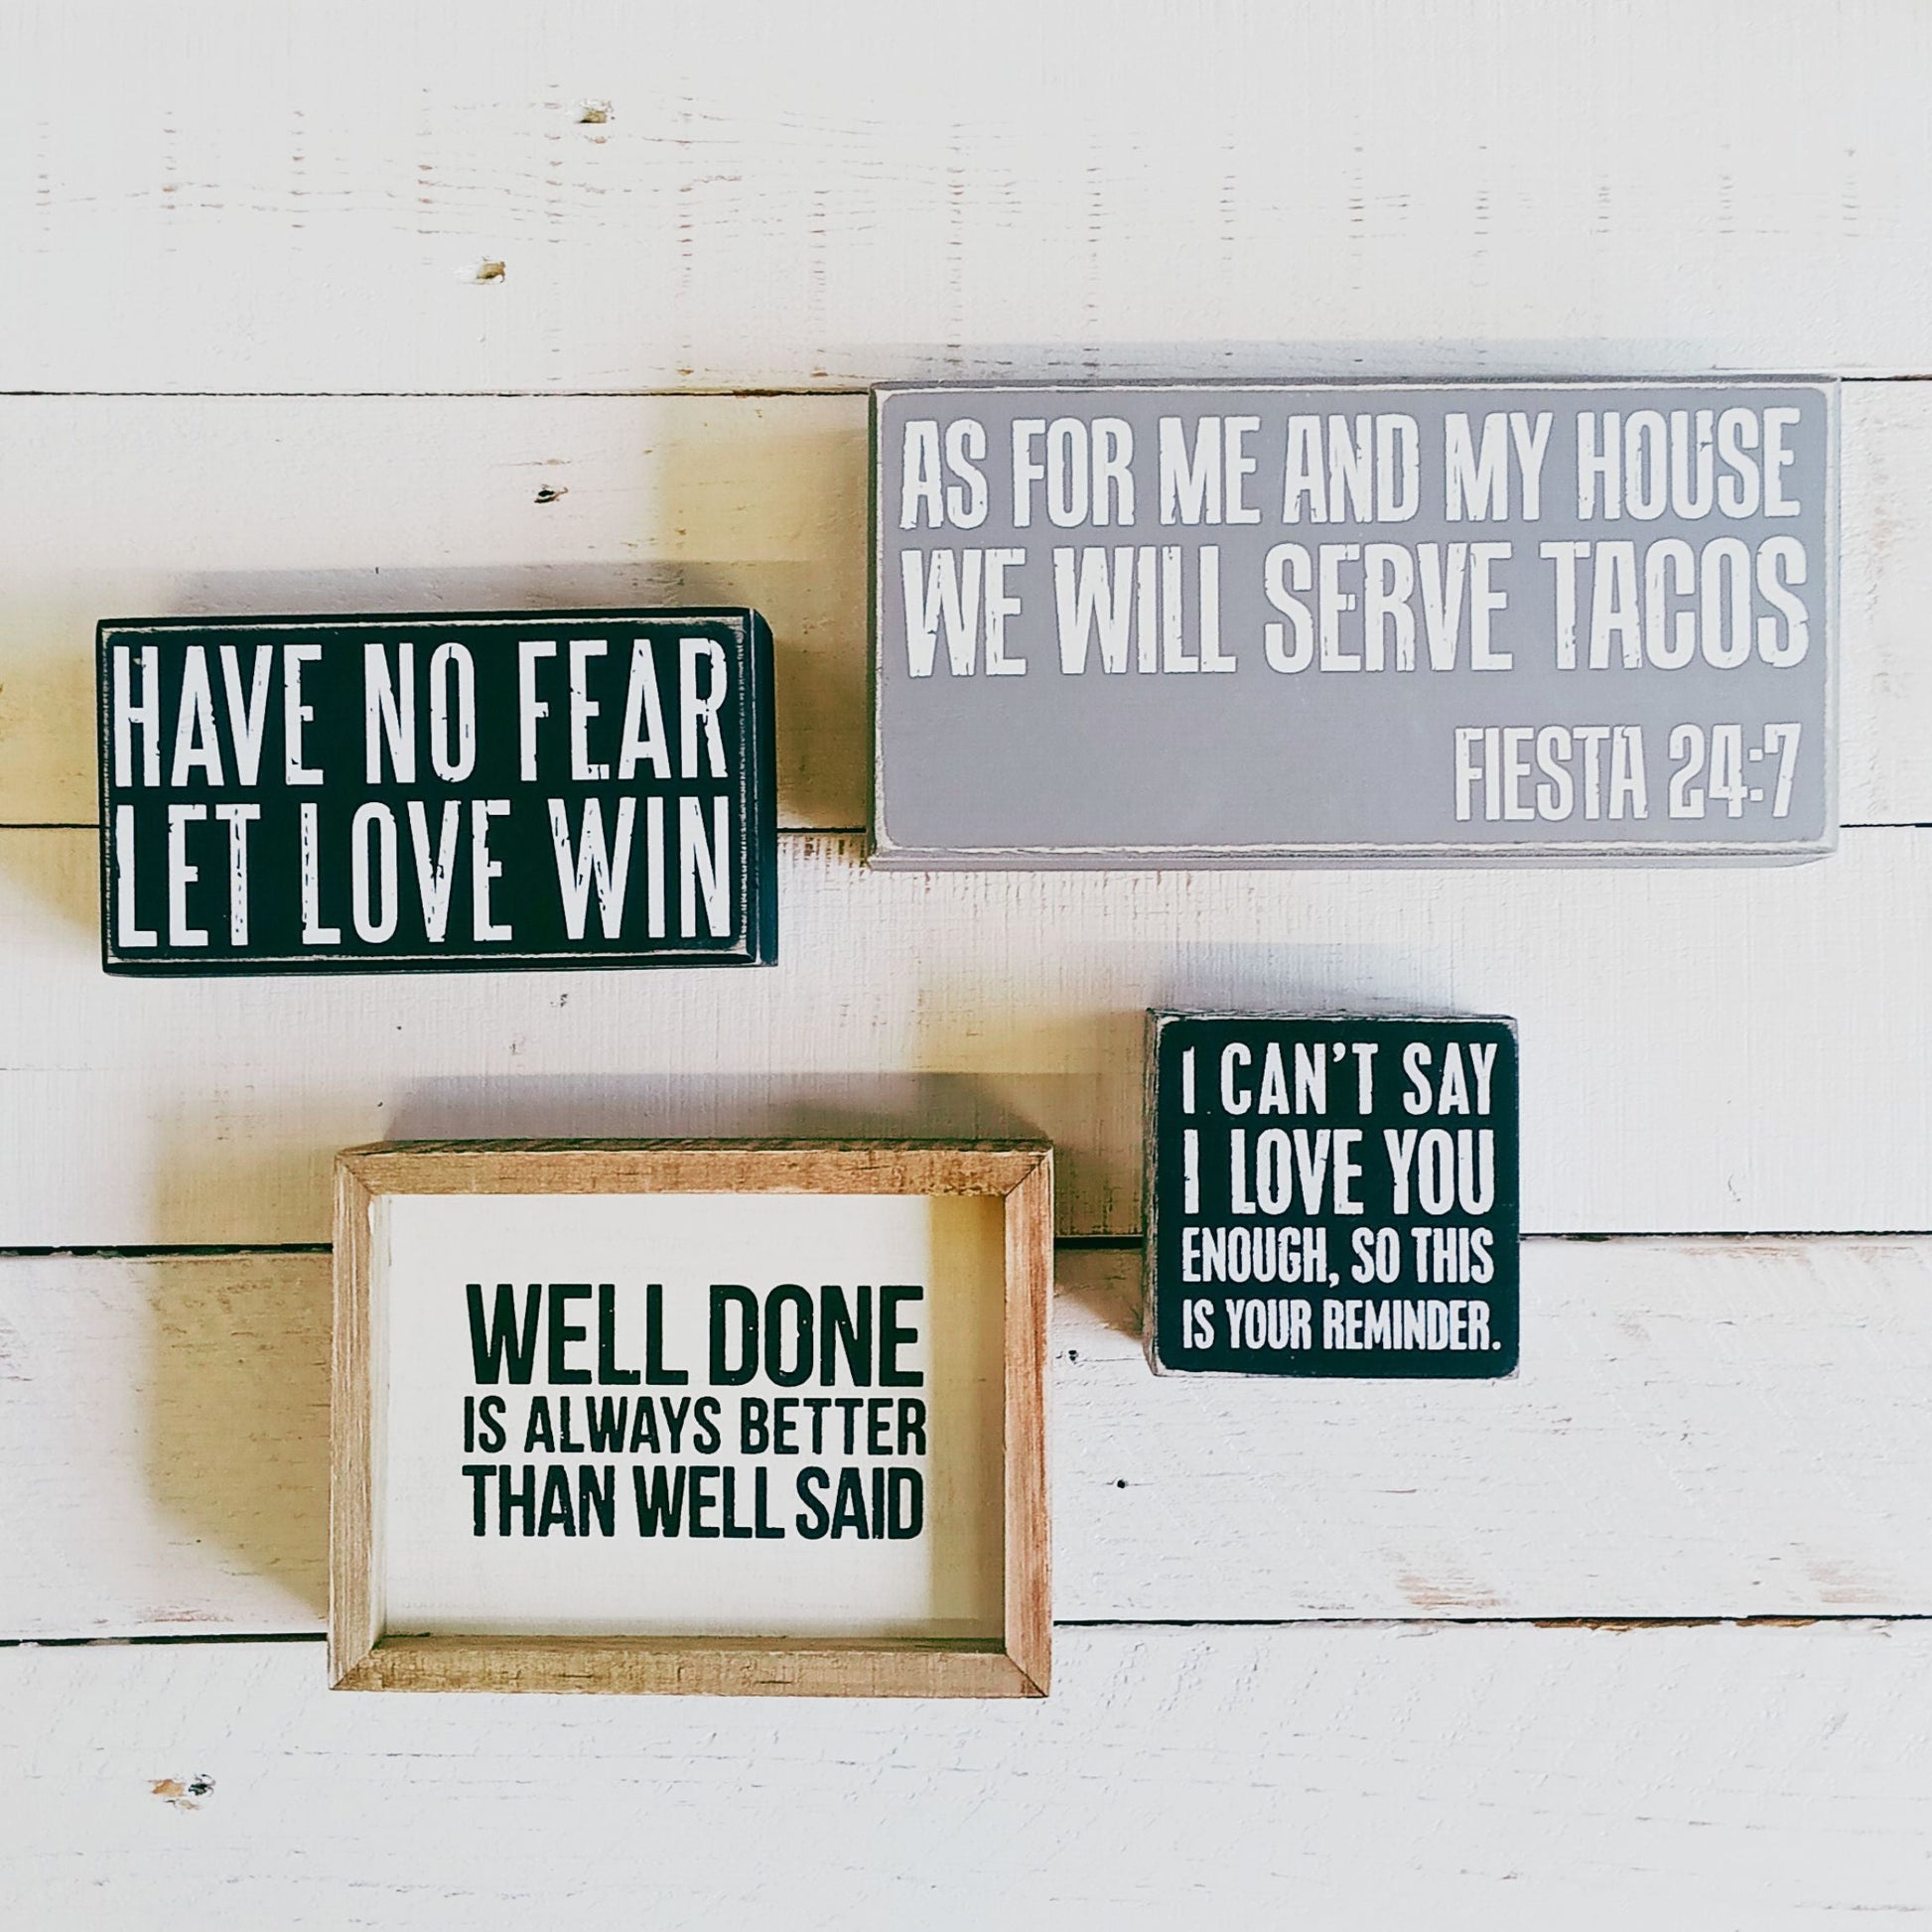 As For Me And My House We Will Serve Tacos Fiesta 24:7 Box Sign | Classic Gray Wooden Desk Wall Decor | 8" x 4"